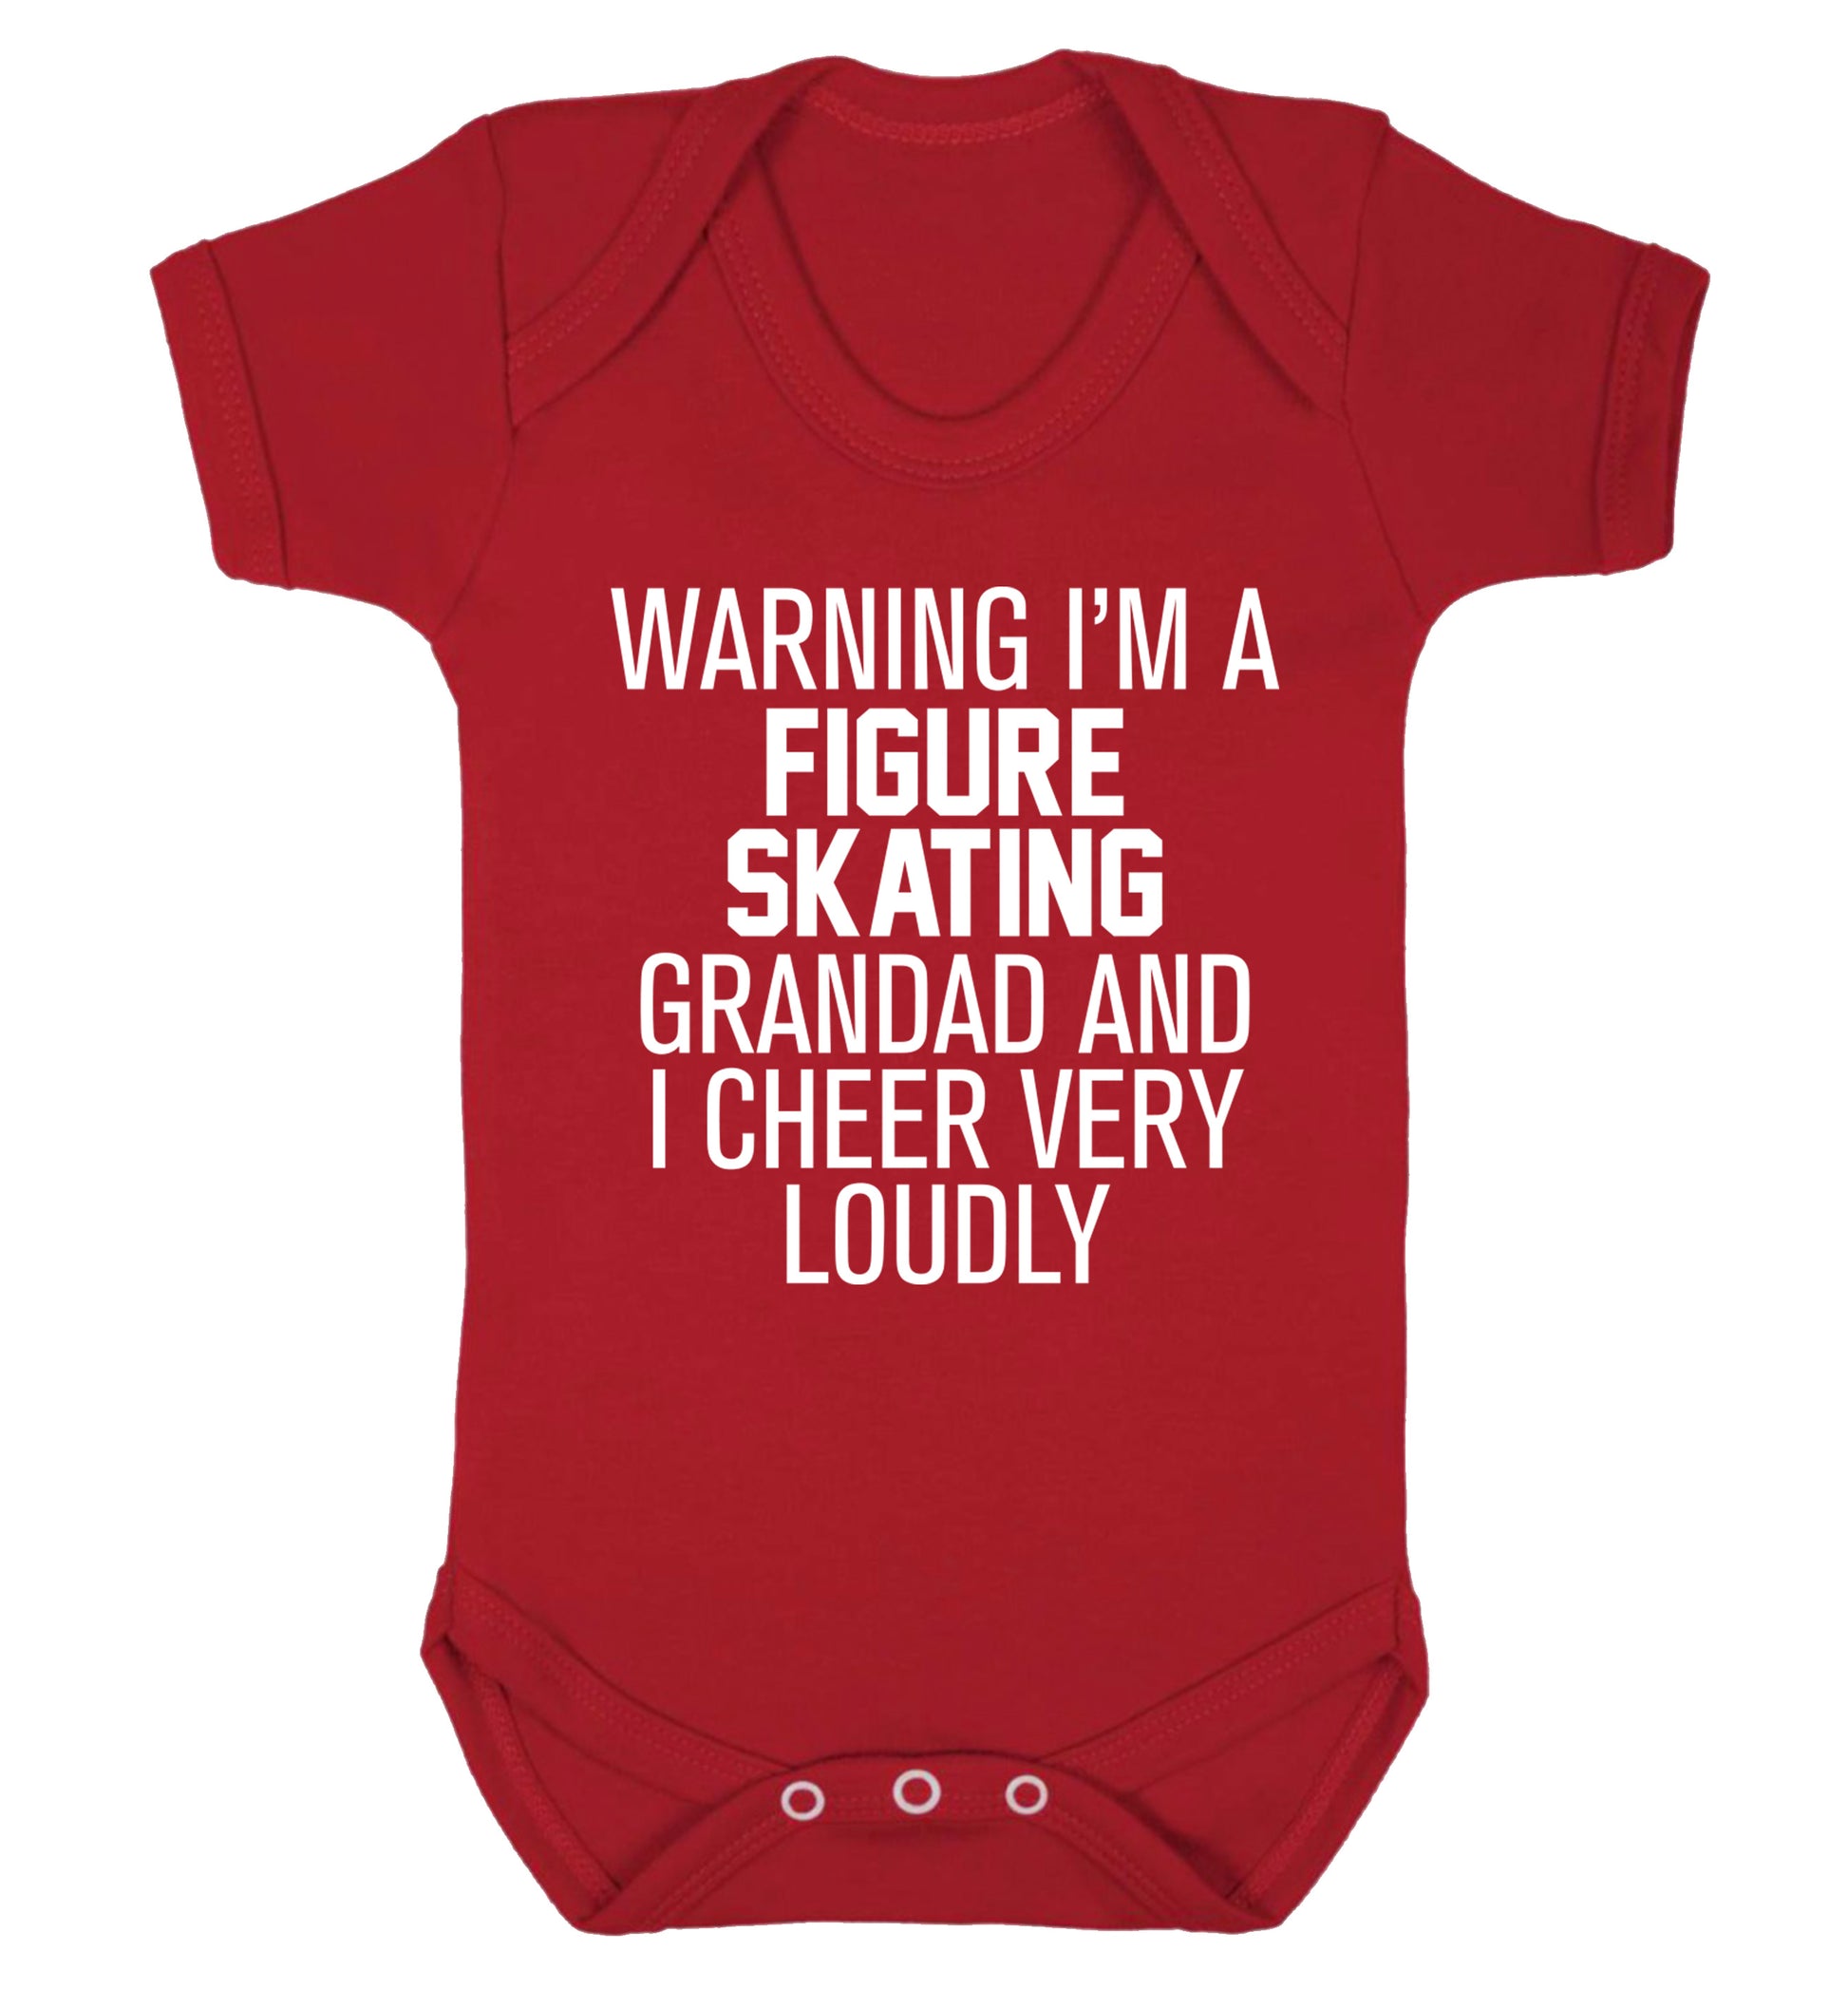 Warning I'm a figure skating grandad and I cheer very loudly Baby Vest red 18-24 months